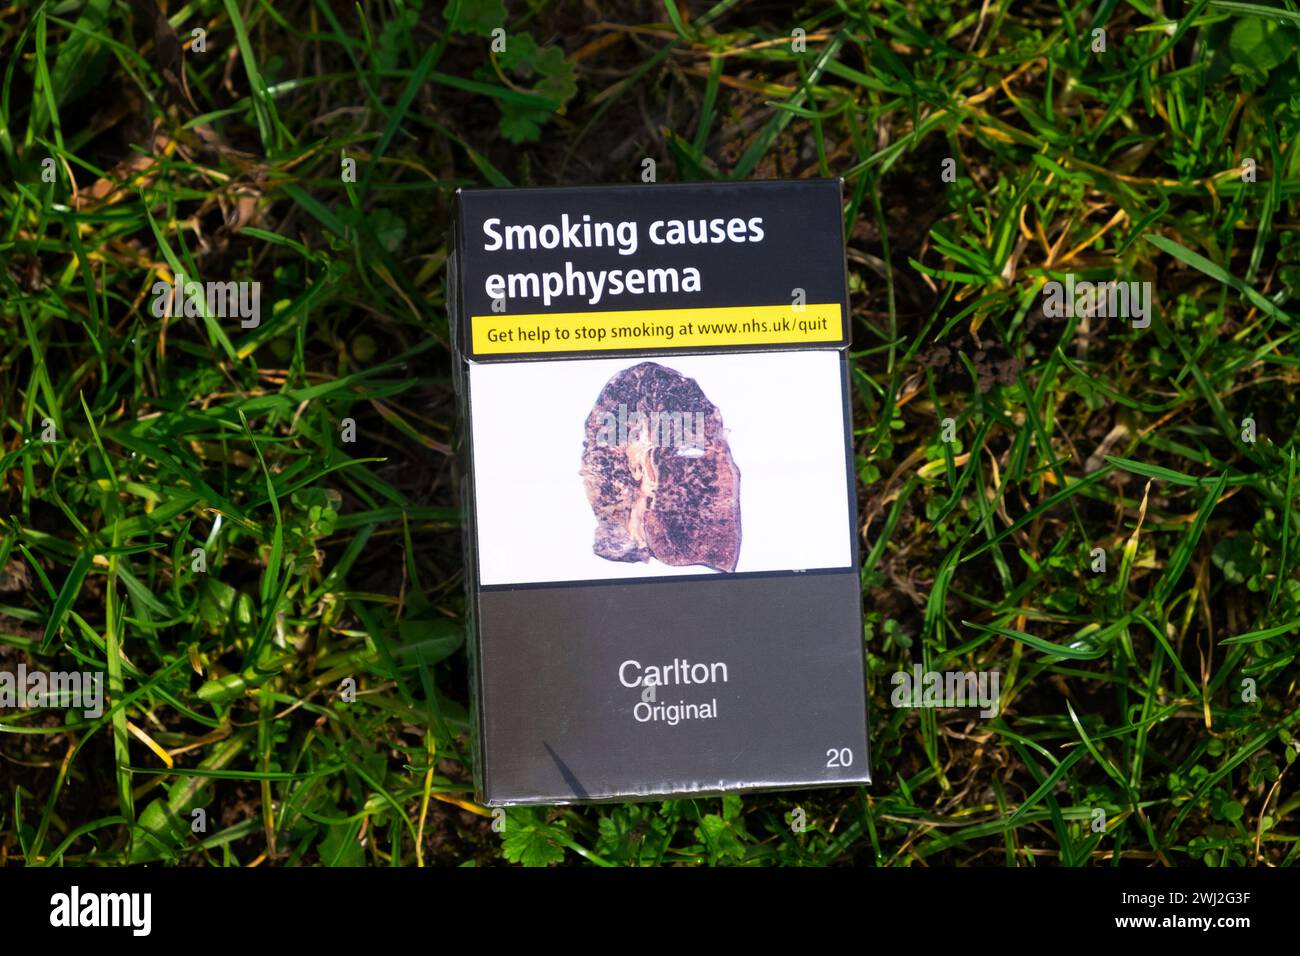 A discarded cigarette packet on grass background with diseased lung caused by smoking displaying emphysema warning in UK  KATHY DEWITT Stock Photo